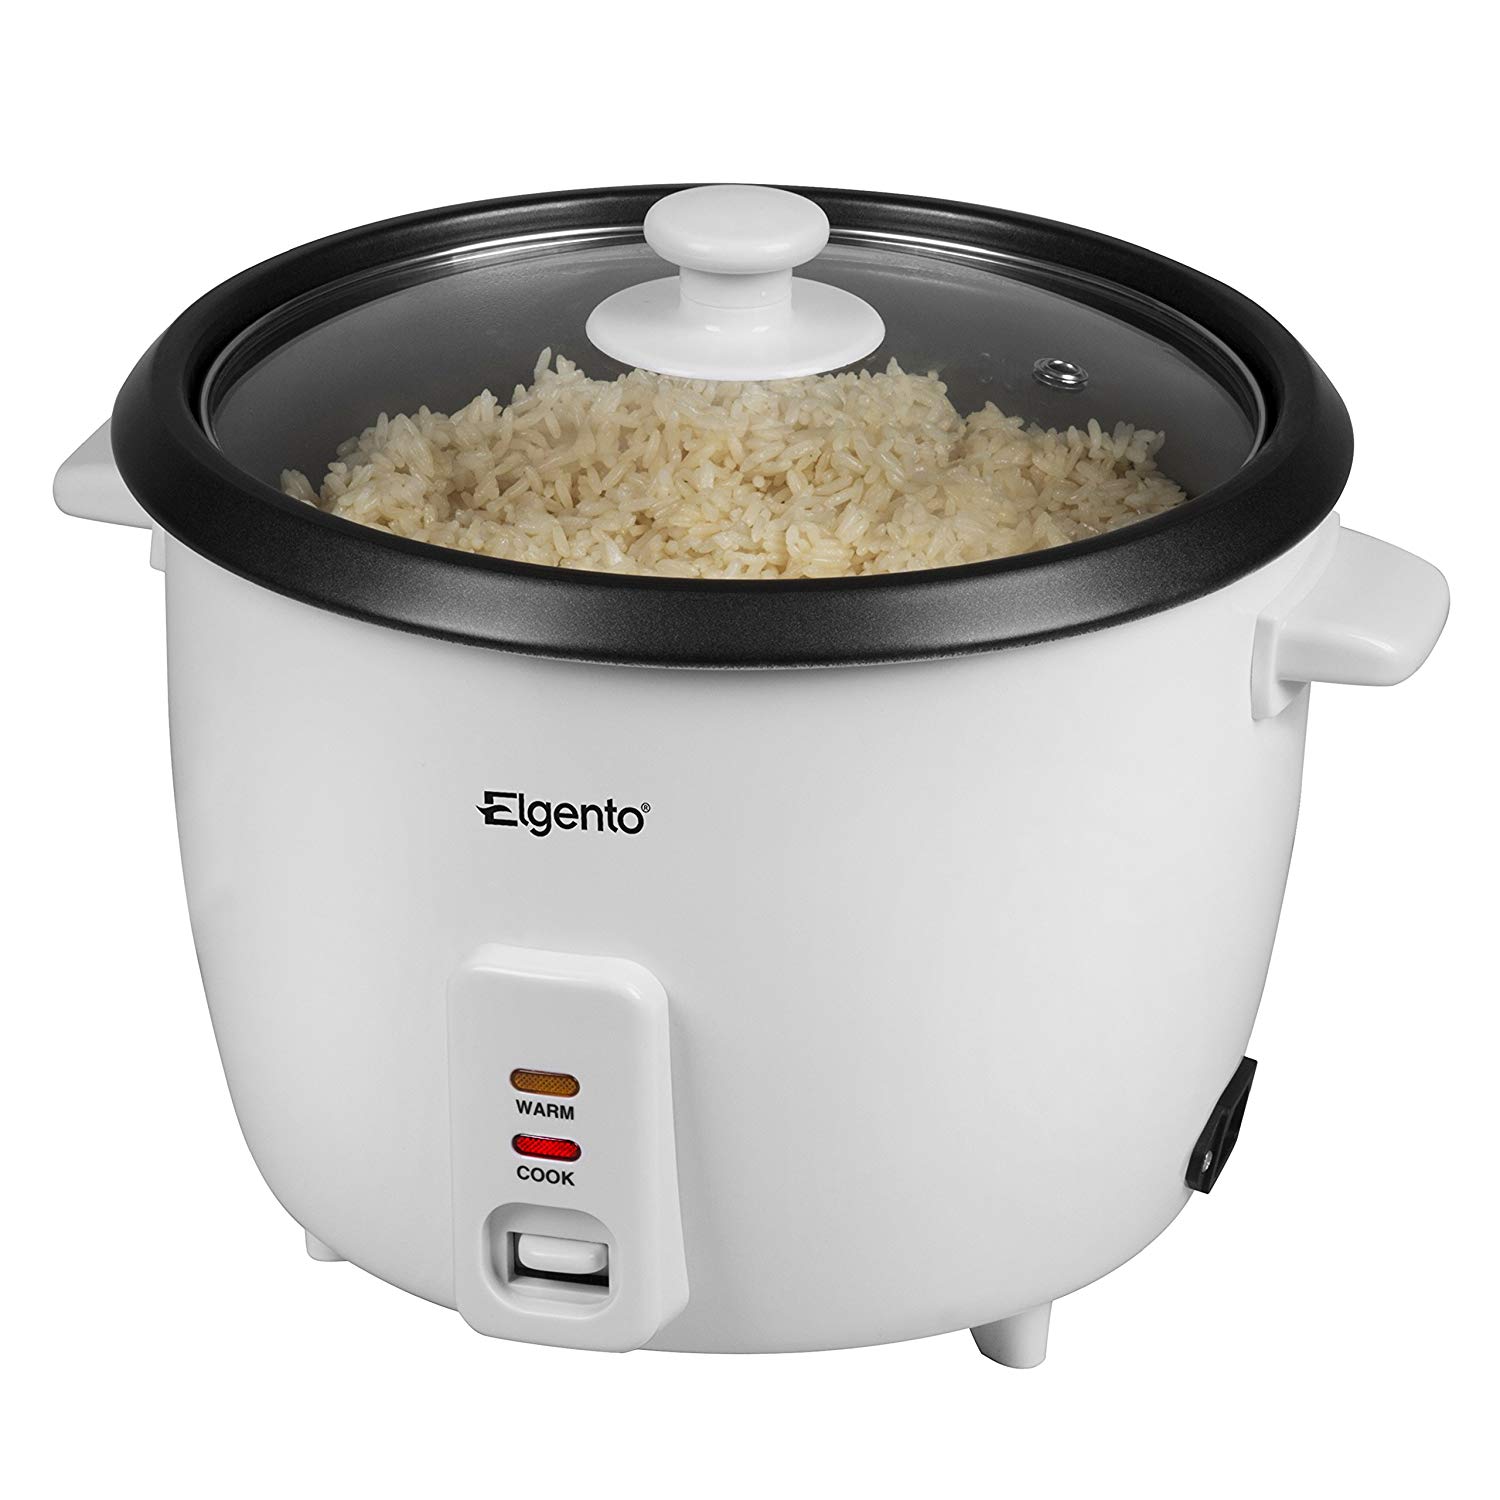 Elgento E19013 Rice Cooker, 0.6 Litre Cooked Rice Capacity, White, 1.5 ...